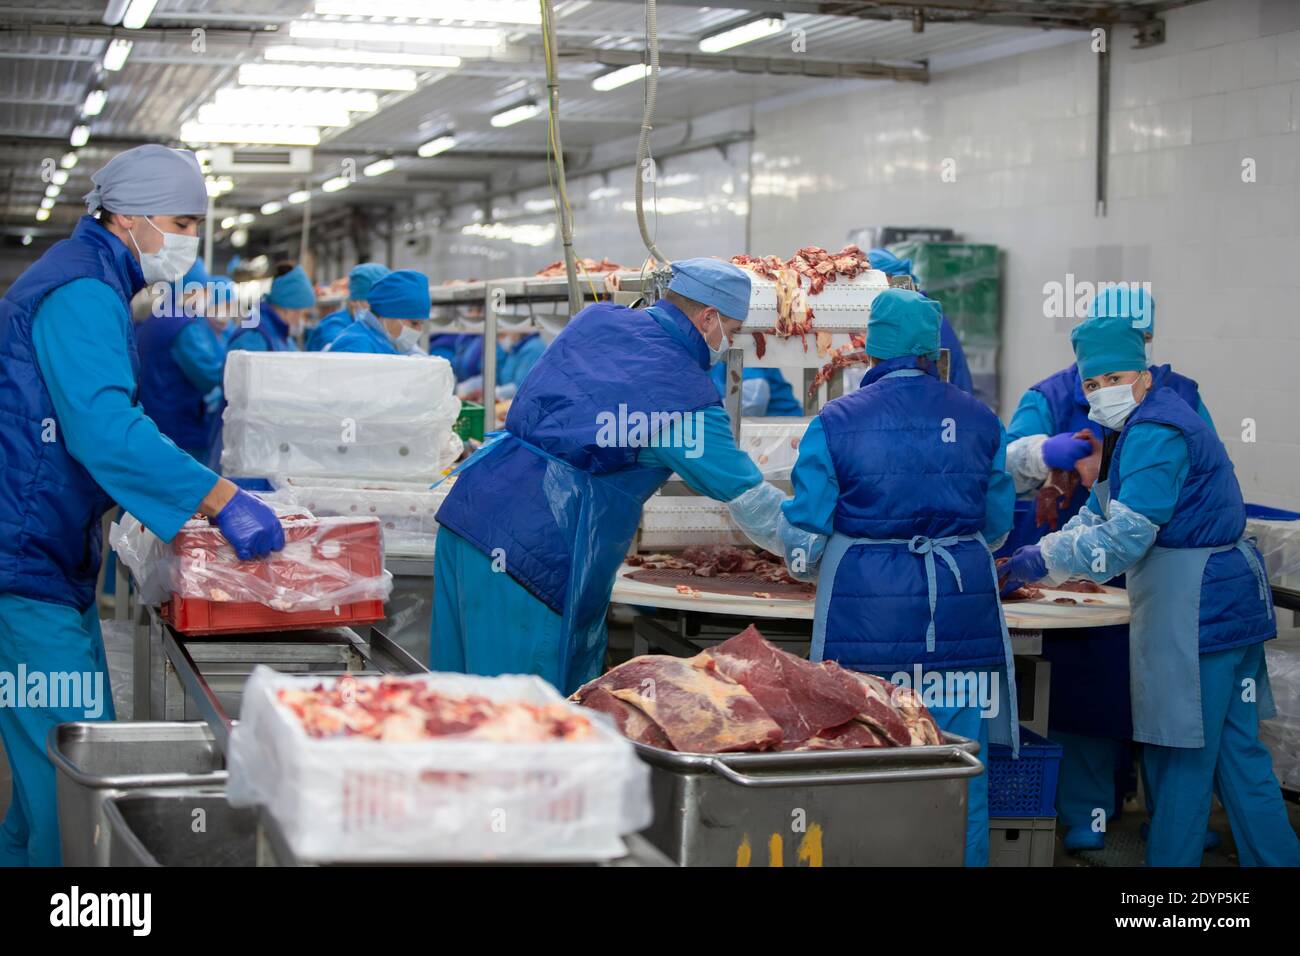 Belarus, Gomilsky district, 13 11 2020. Meat production. workers behind a conveyor belt at a meat factory. Stock Photo